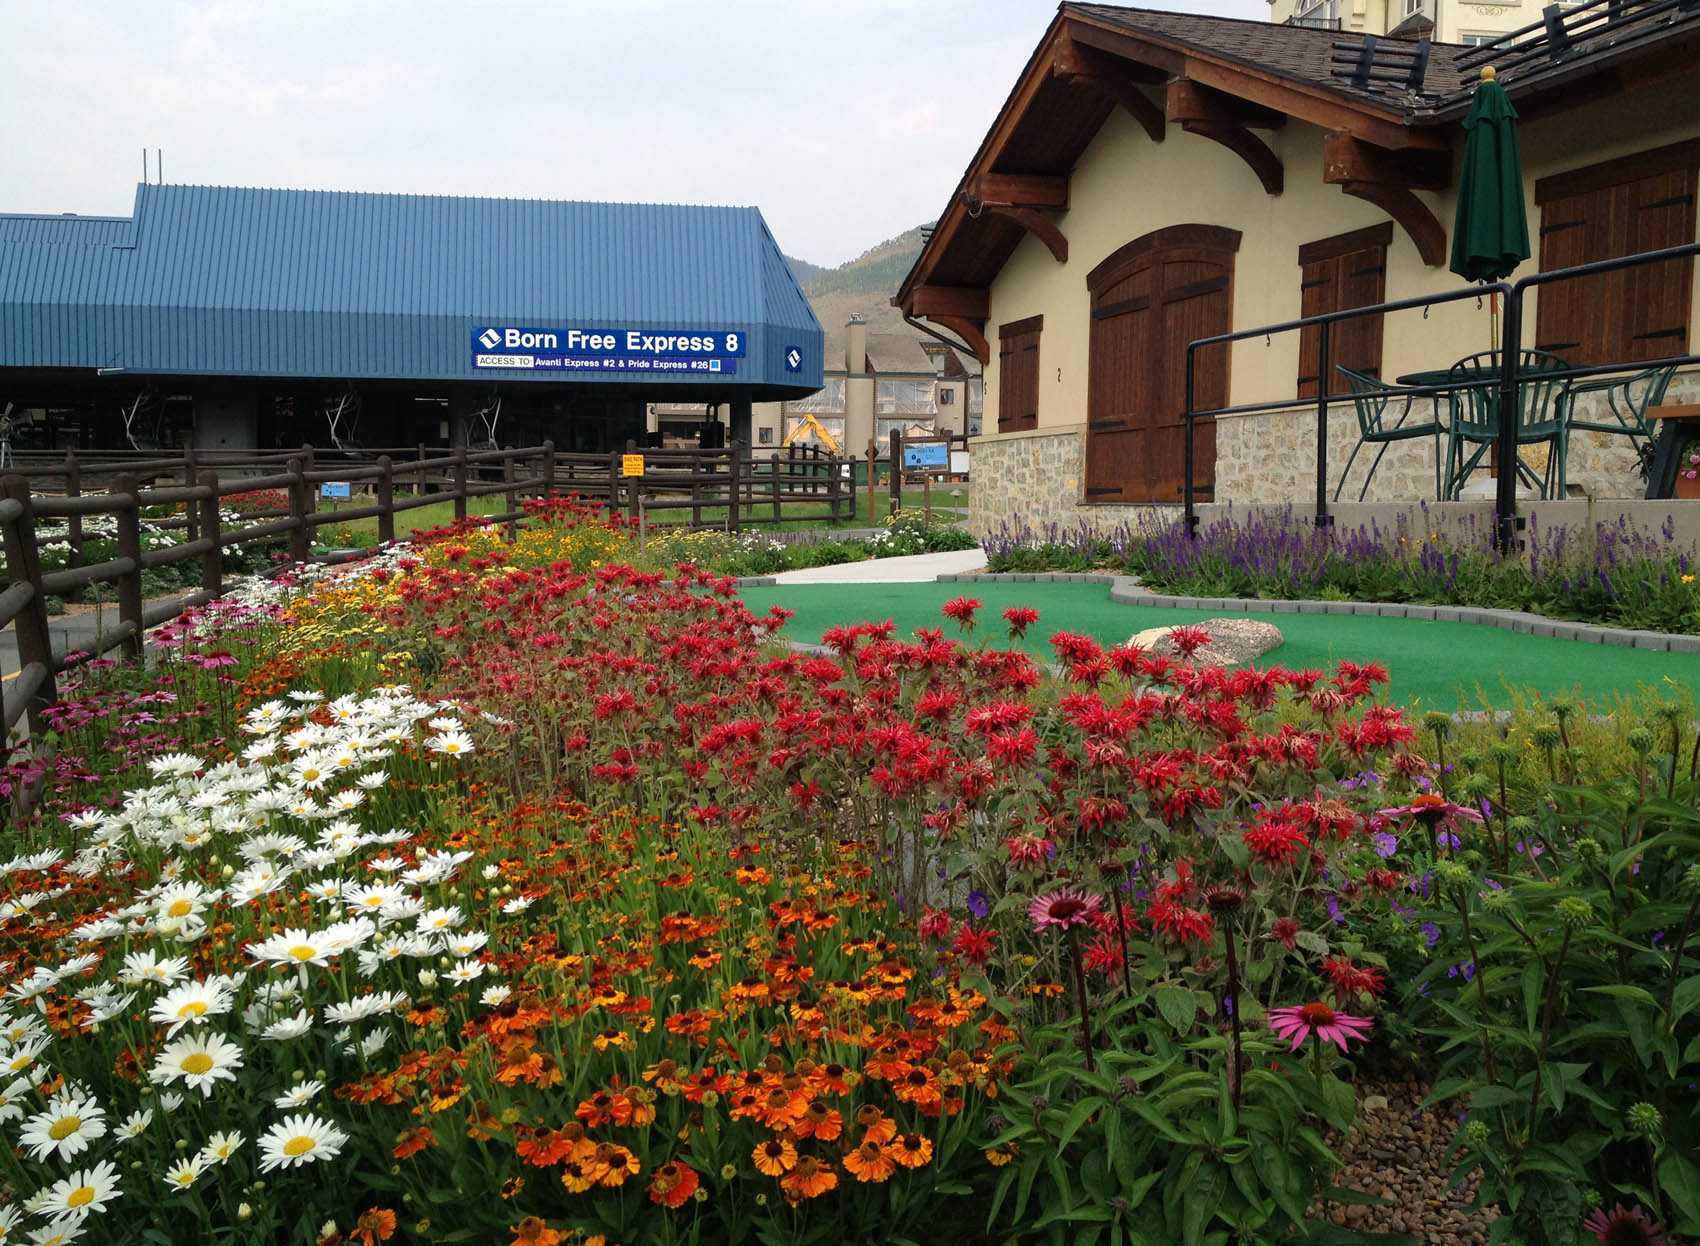 A colorful flower bed in the foreground with a chairlift station labeled 